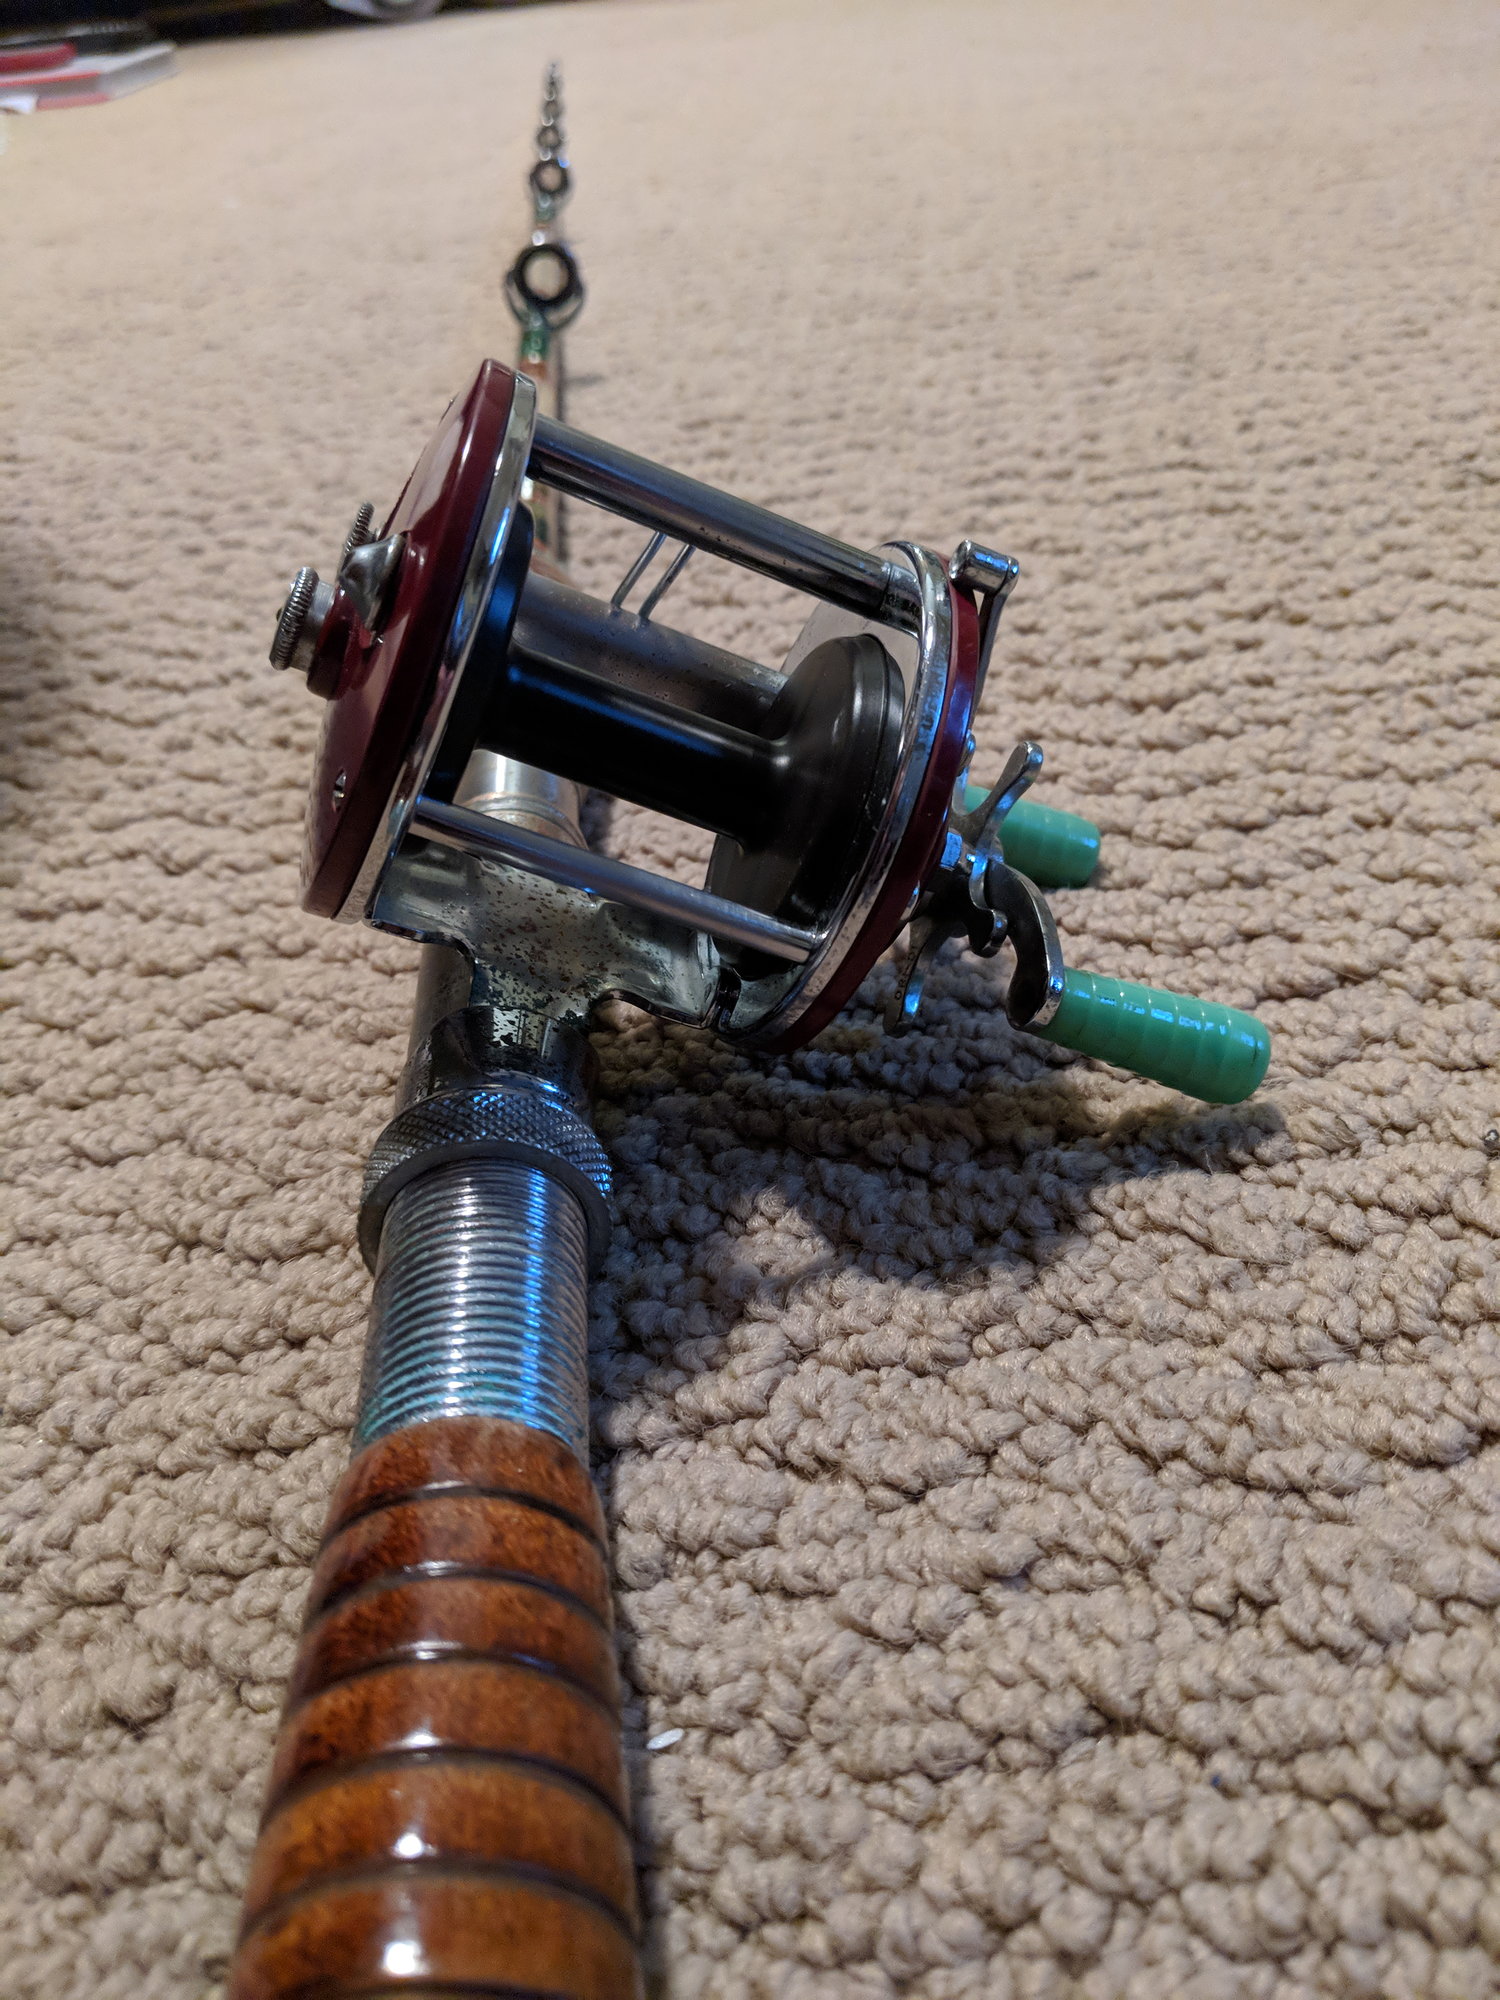 Help identify vintage fishing rod - The Hull Truth - Boating and